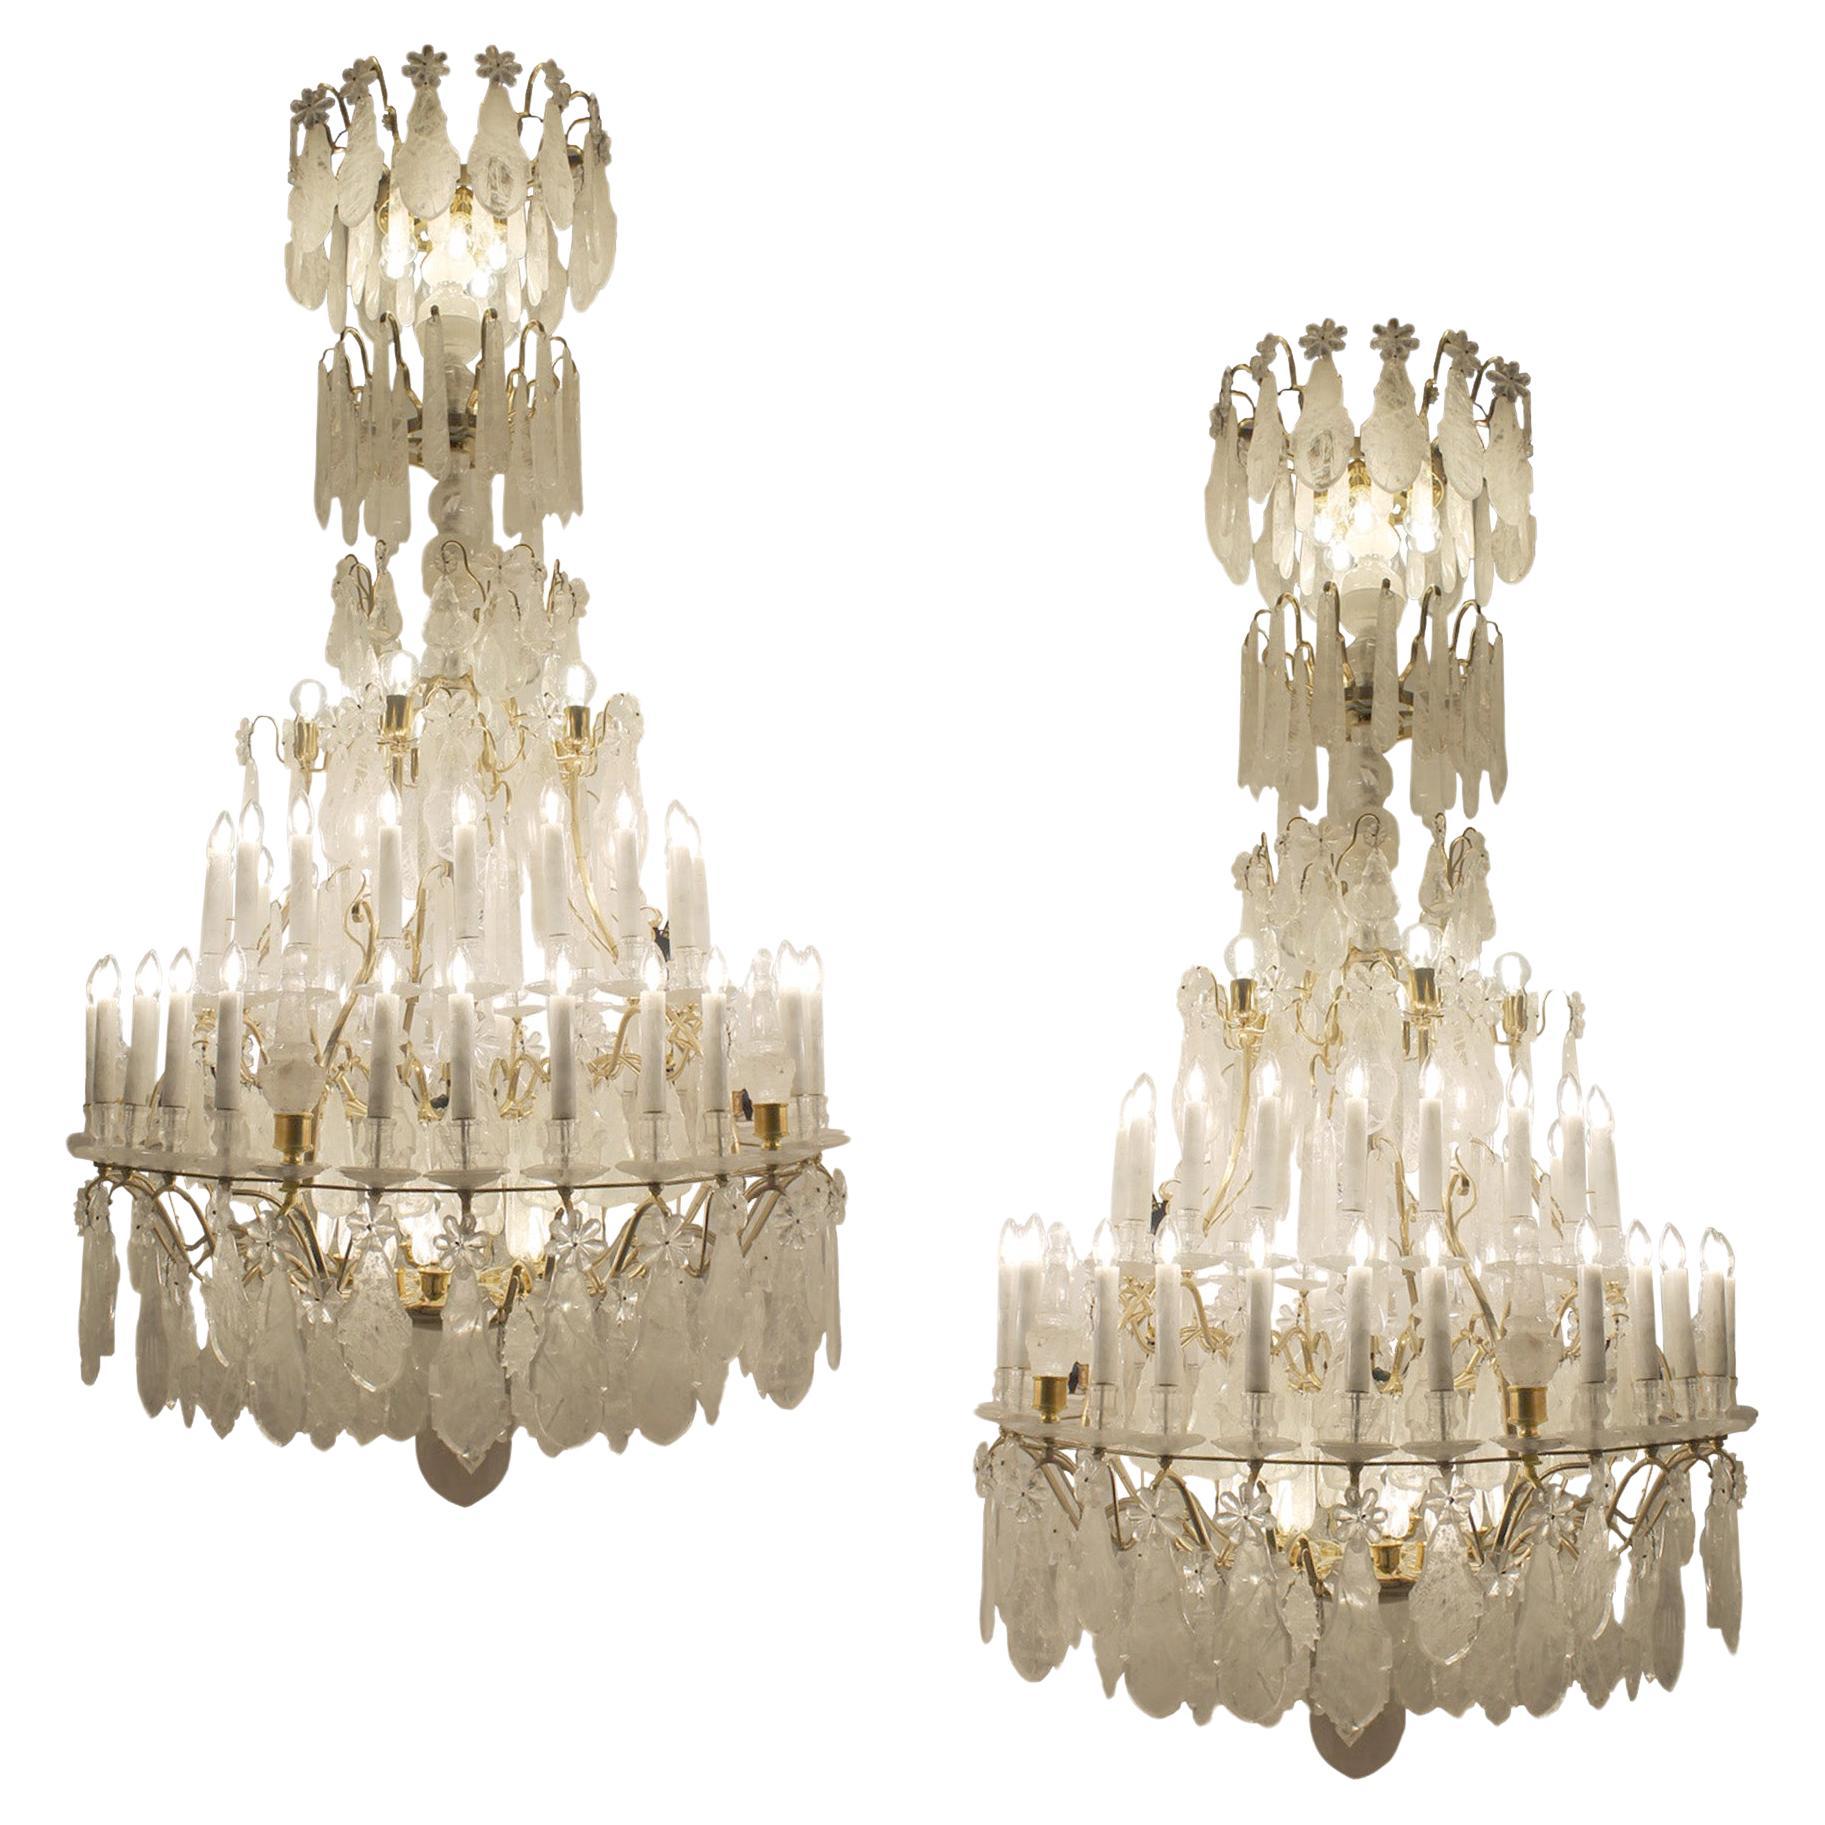 Exceptional pair of rock crystal chandeliers in the classic Louis XV style